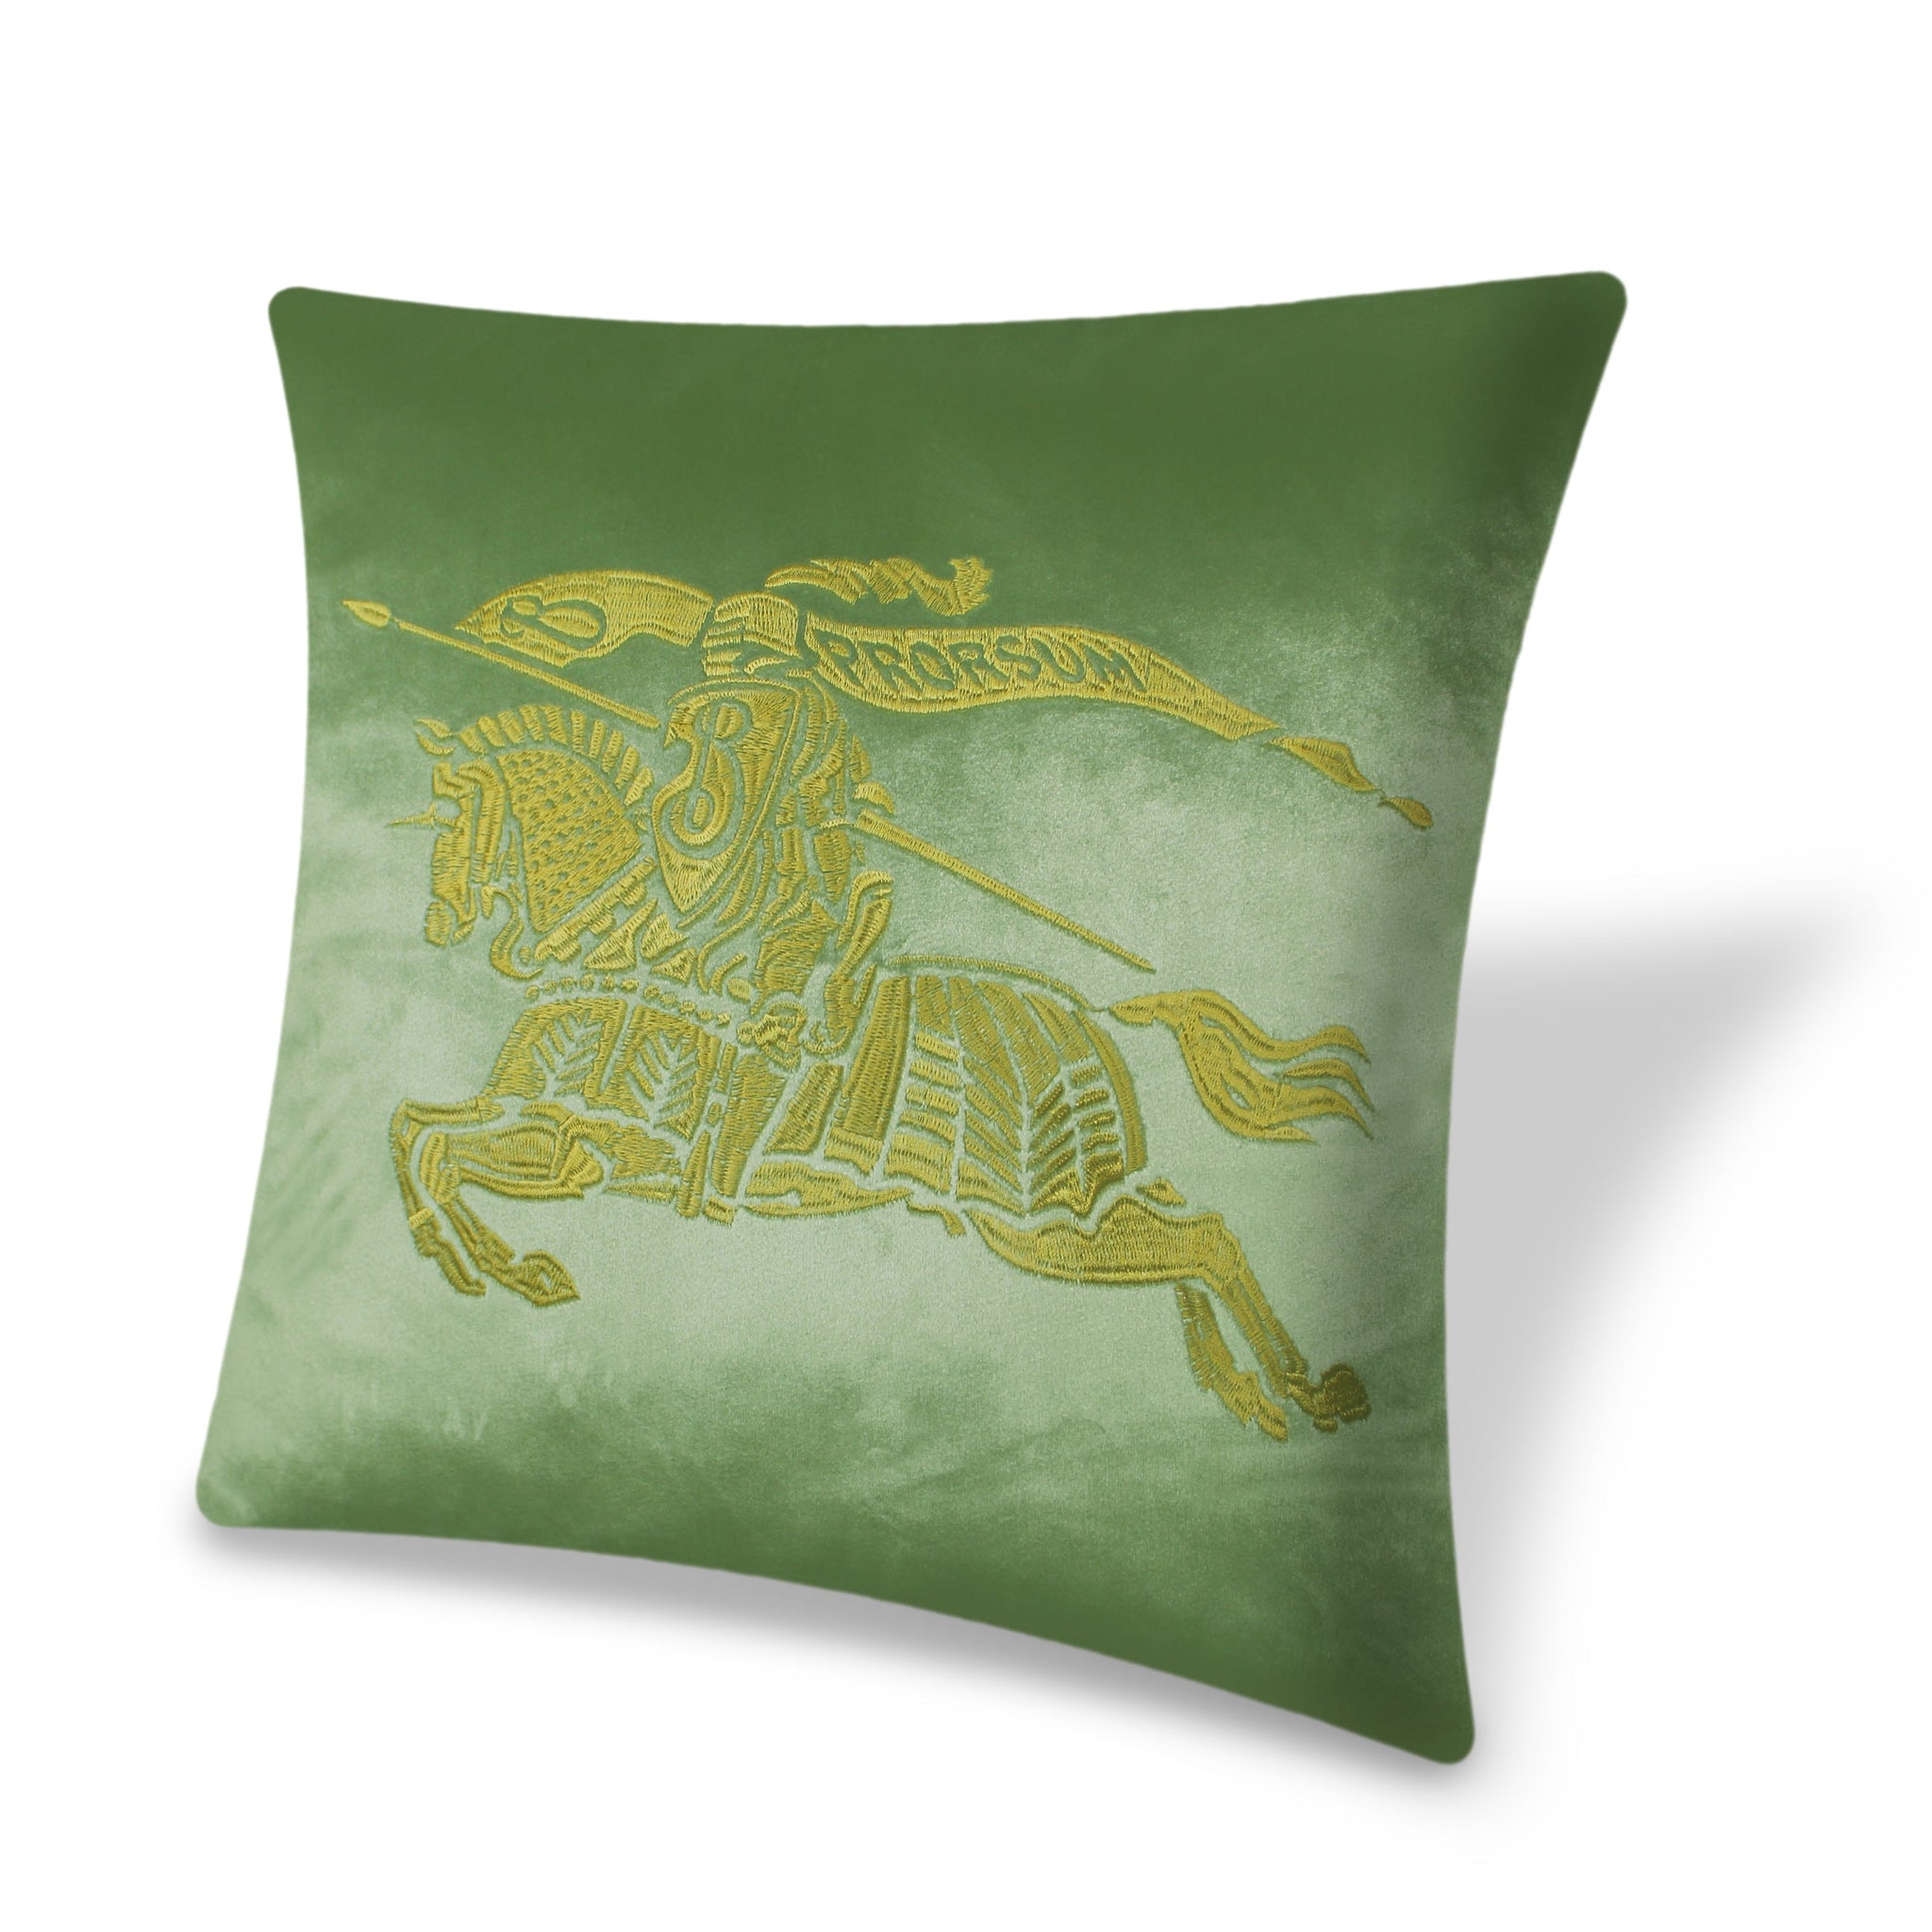 Green Pillow Cover Velvet Decorative Cushion Cover Embroidery  Iconic Horse Throw Pillow Pillow Case for Sofa Chair Bedroom Living Room 45x45 cm 18x18 Inches